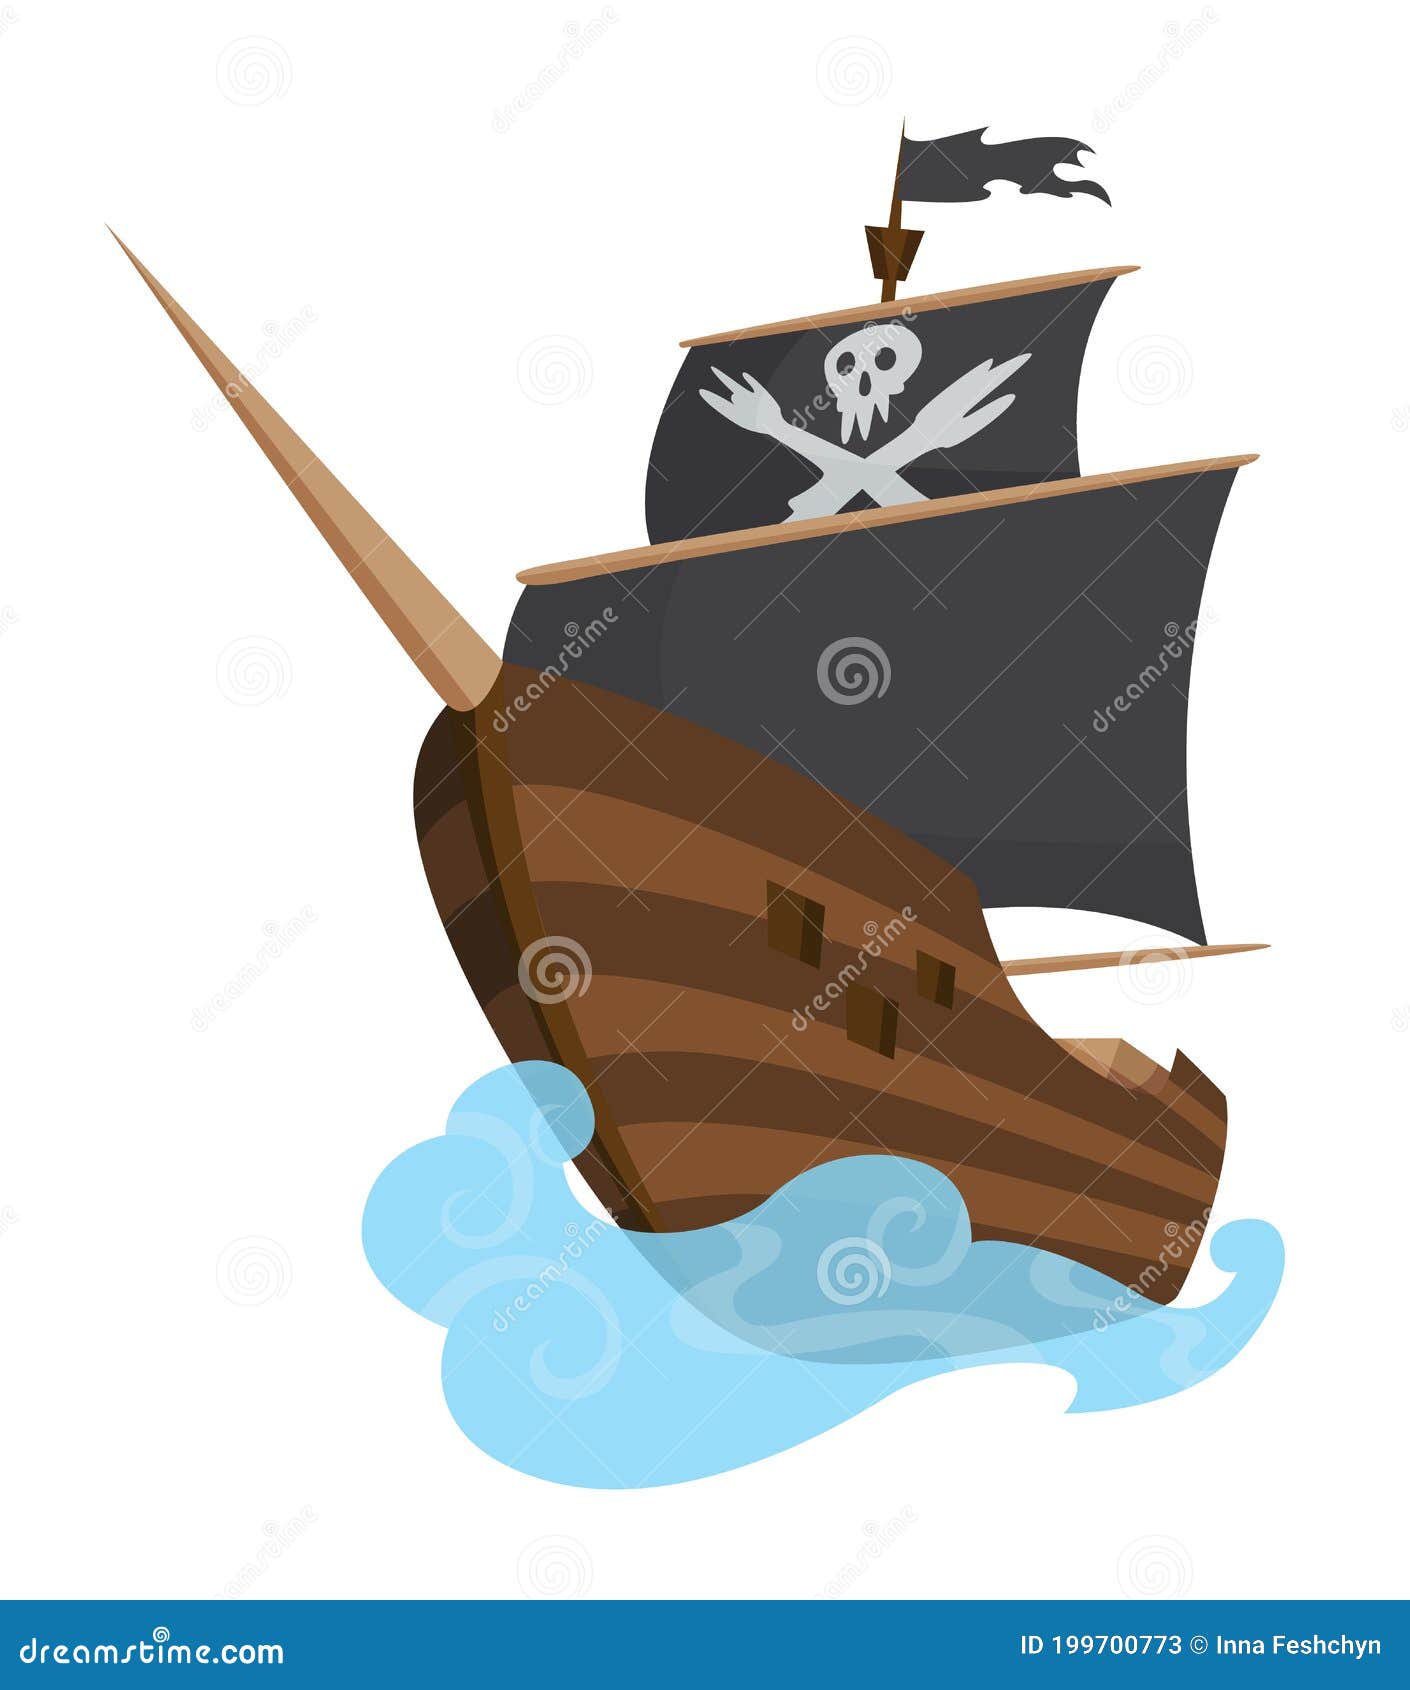 Stylized Cartoon Pirate Ship Illustration with Jolly Roger and Black Sails.  Cute Vector Drawing Stock Vector - Illustration of design, boat: 199700773